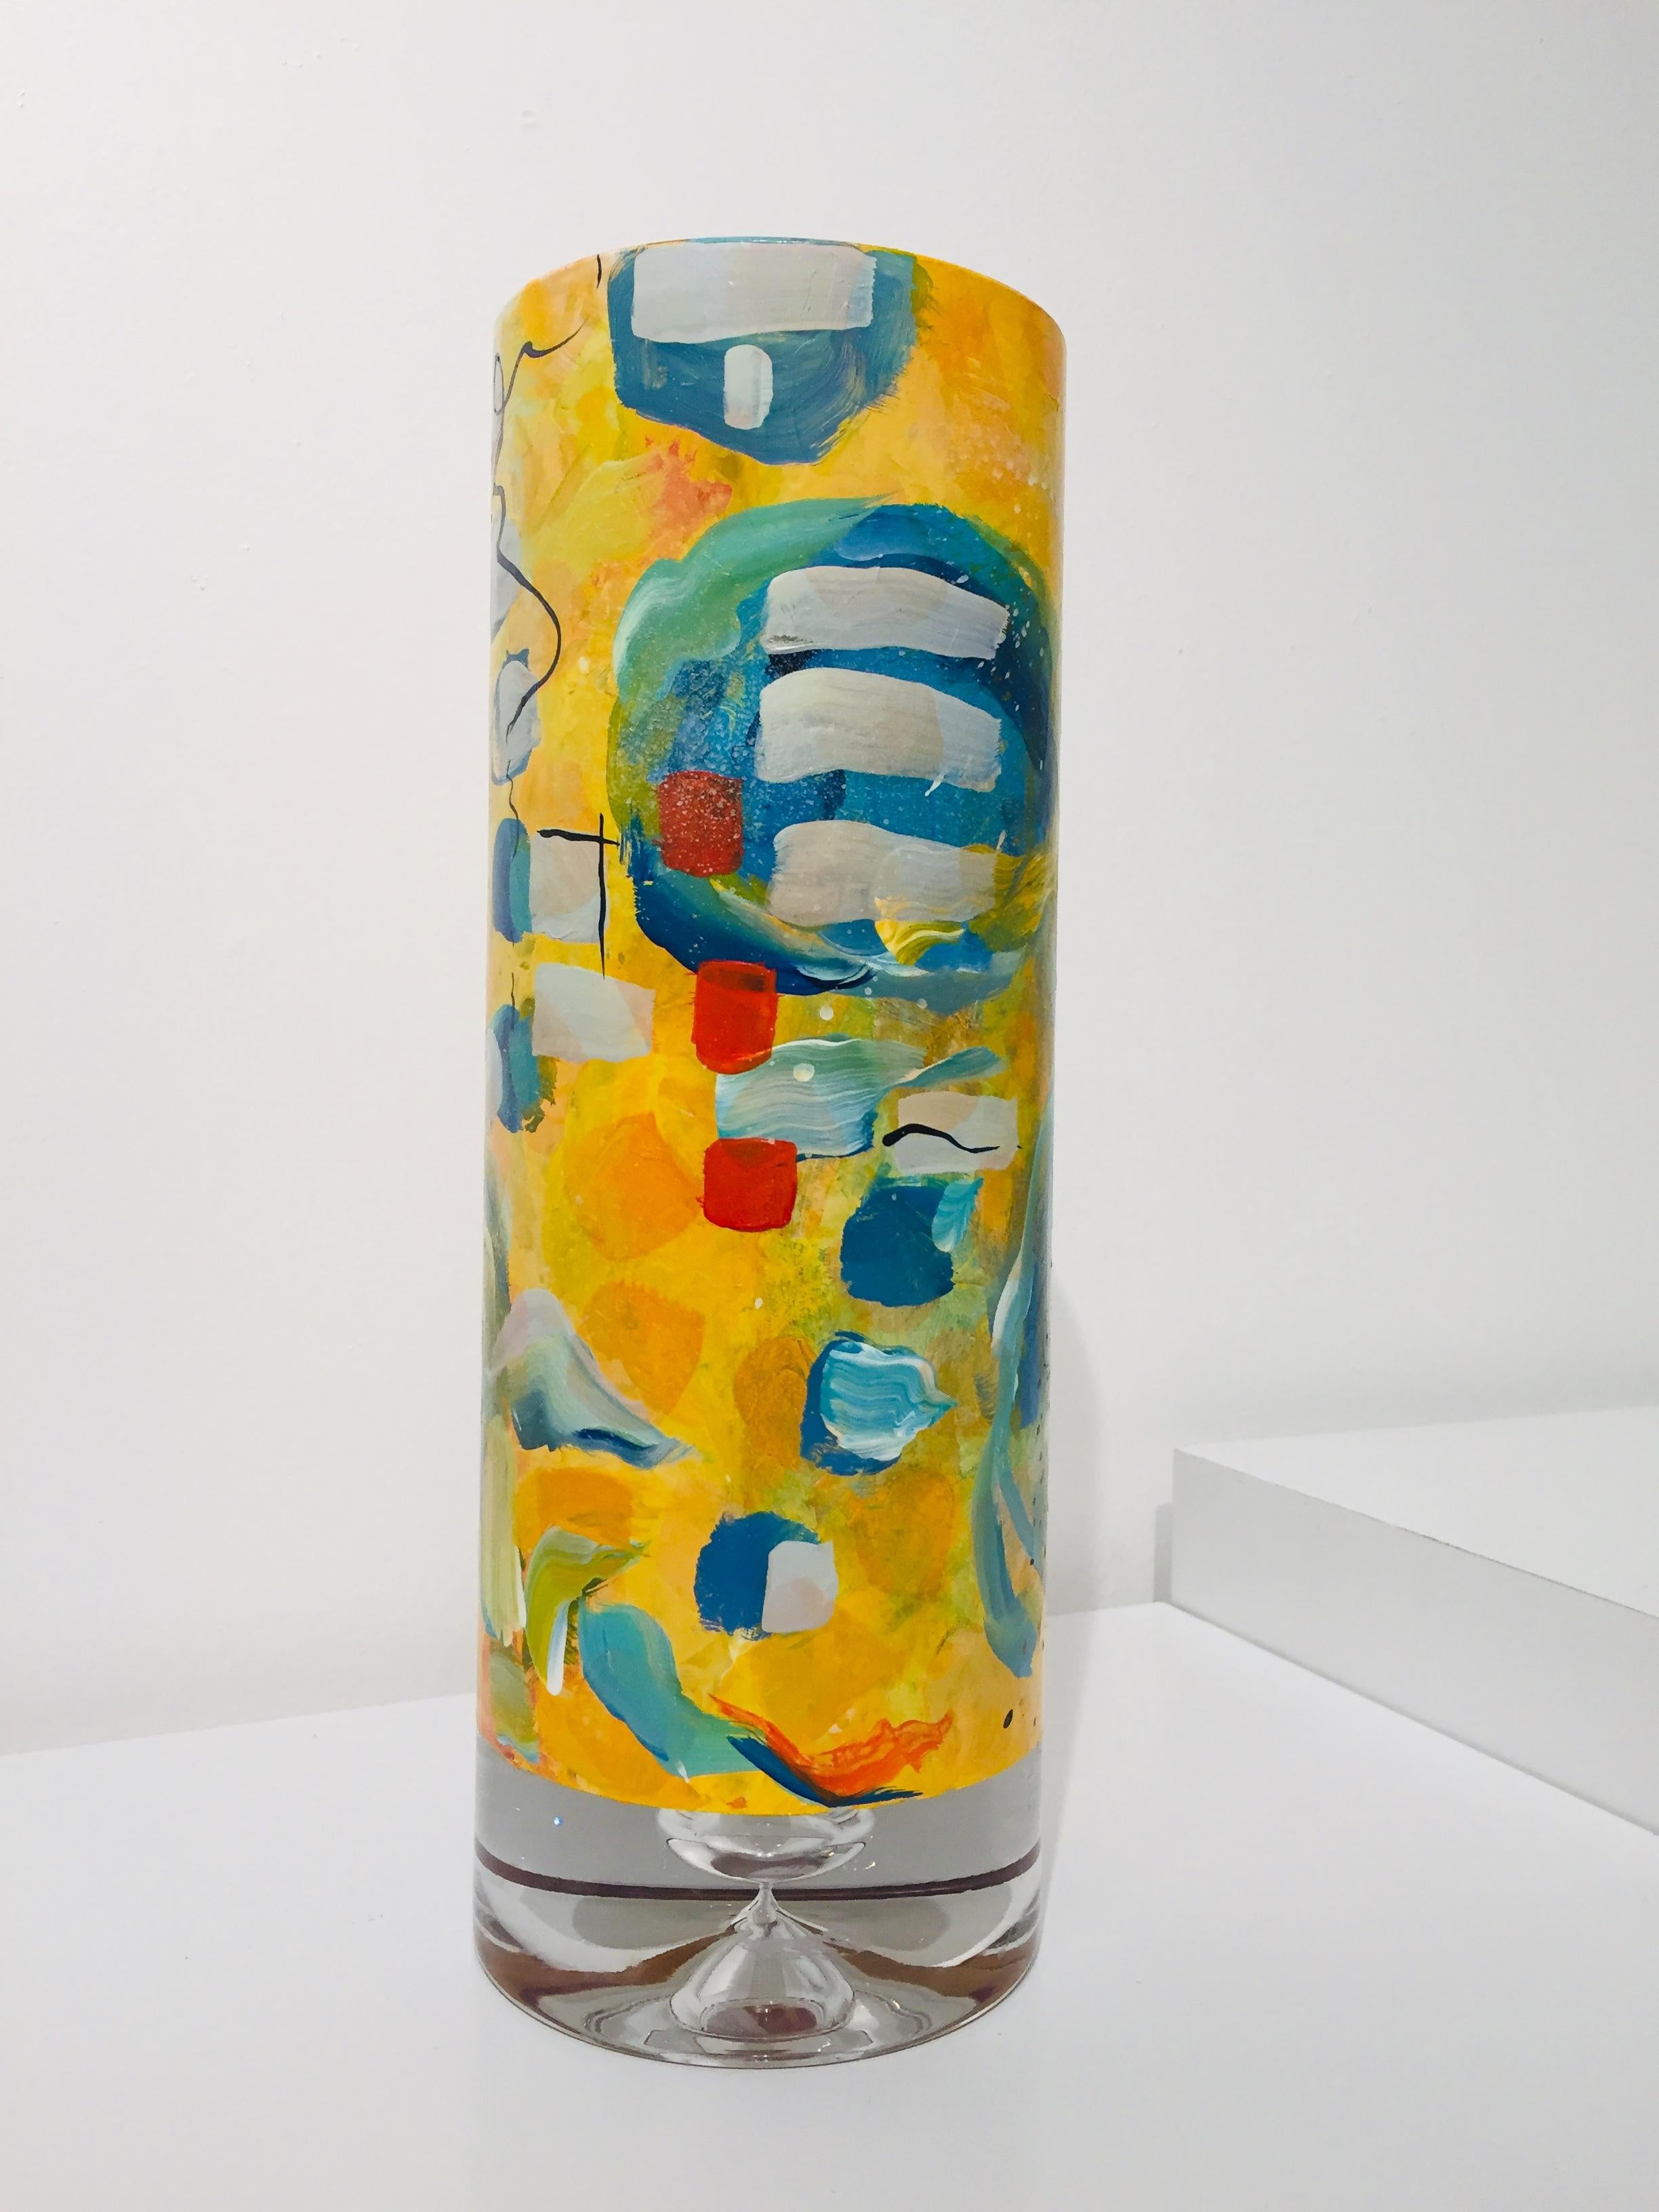 Hand painted one-of-a-kind glass vase by artist Kathleen Kane-Murrell. This vases are perfectly rendered in acrylic paint and arrive with a note from the artist. First time available to the public.

 Image 5 shows the five vases painted to date.